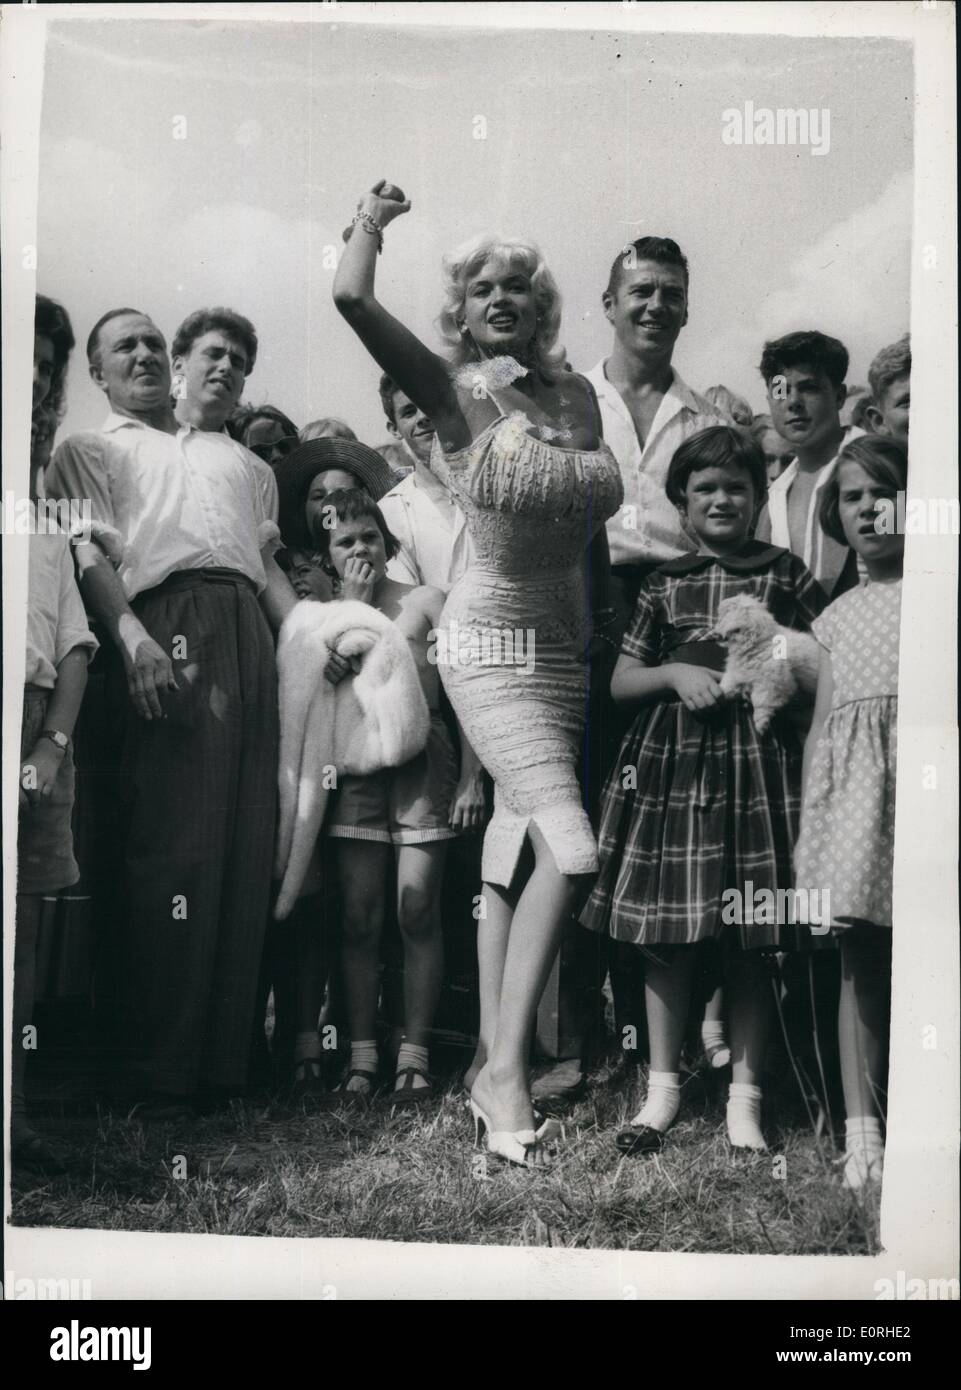 Aug. 08, 1959 - Jayne Mansfield attends garden Fete: American film-star Jayne Mansfield with her husband Micky Hargitay this afternoon attended a garden fete at Angering-on-Bea in Sussex. The fete was to help raise funds for the nearby St. Pridgets - the home for the incurably sick, set up by group captain Leonard Cheshire V.C. Photo shows Jayne Mansfield trys her hand at coconut shy, one of the many side shows at the fete. Stock Photo